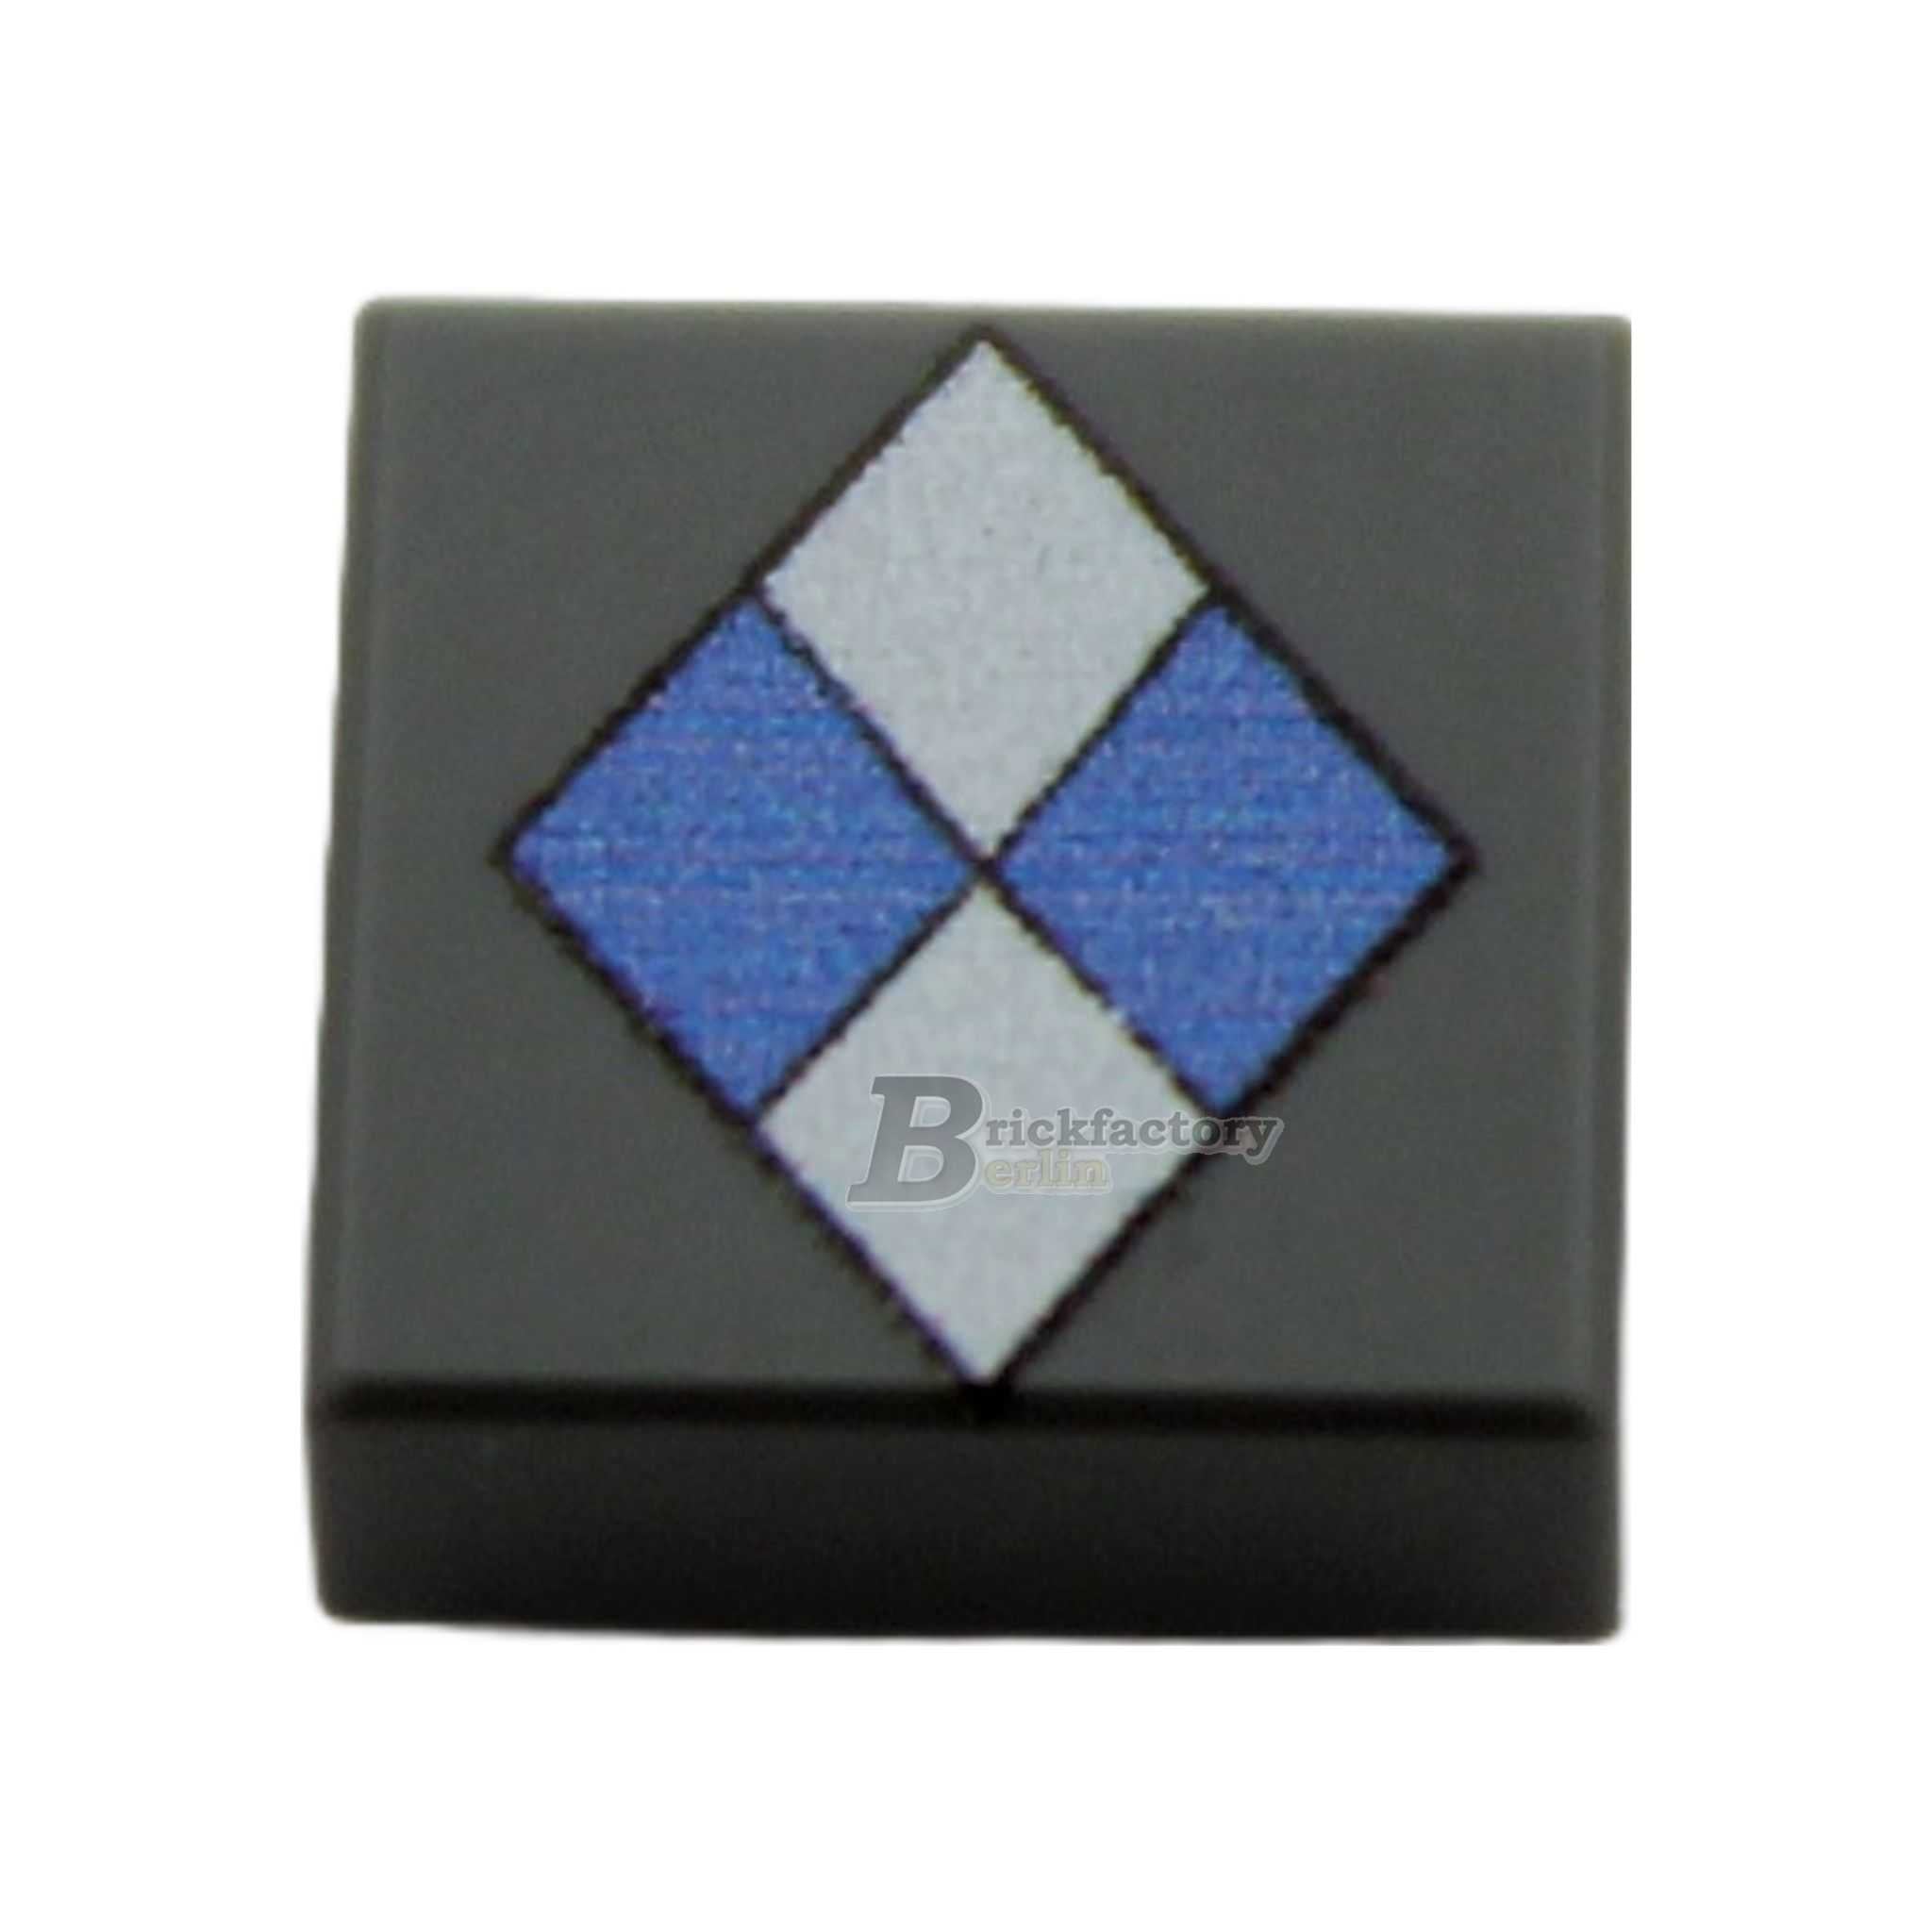 BF-0448L - Division Badge 7.INF. (Printed LEGO® tile 1x1)